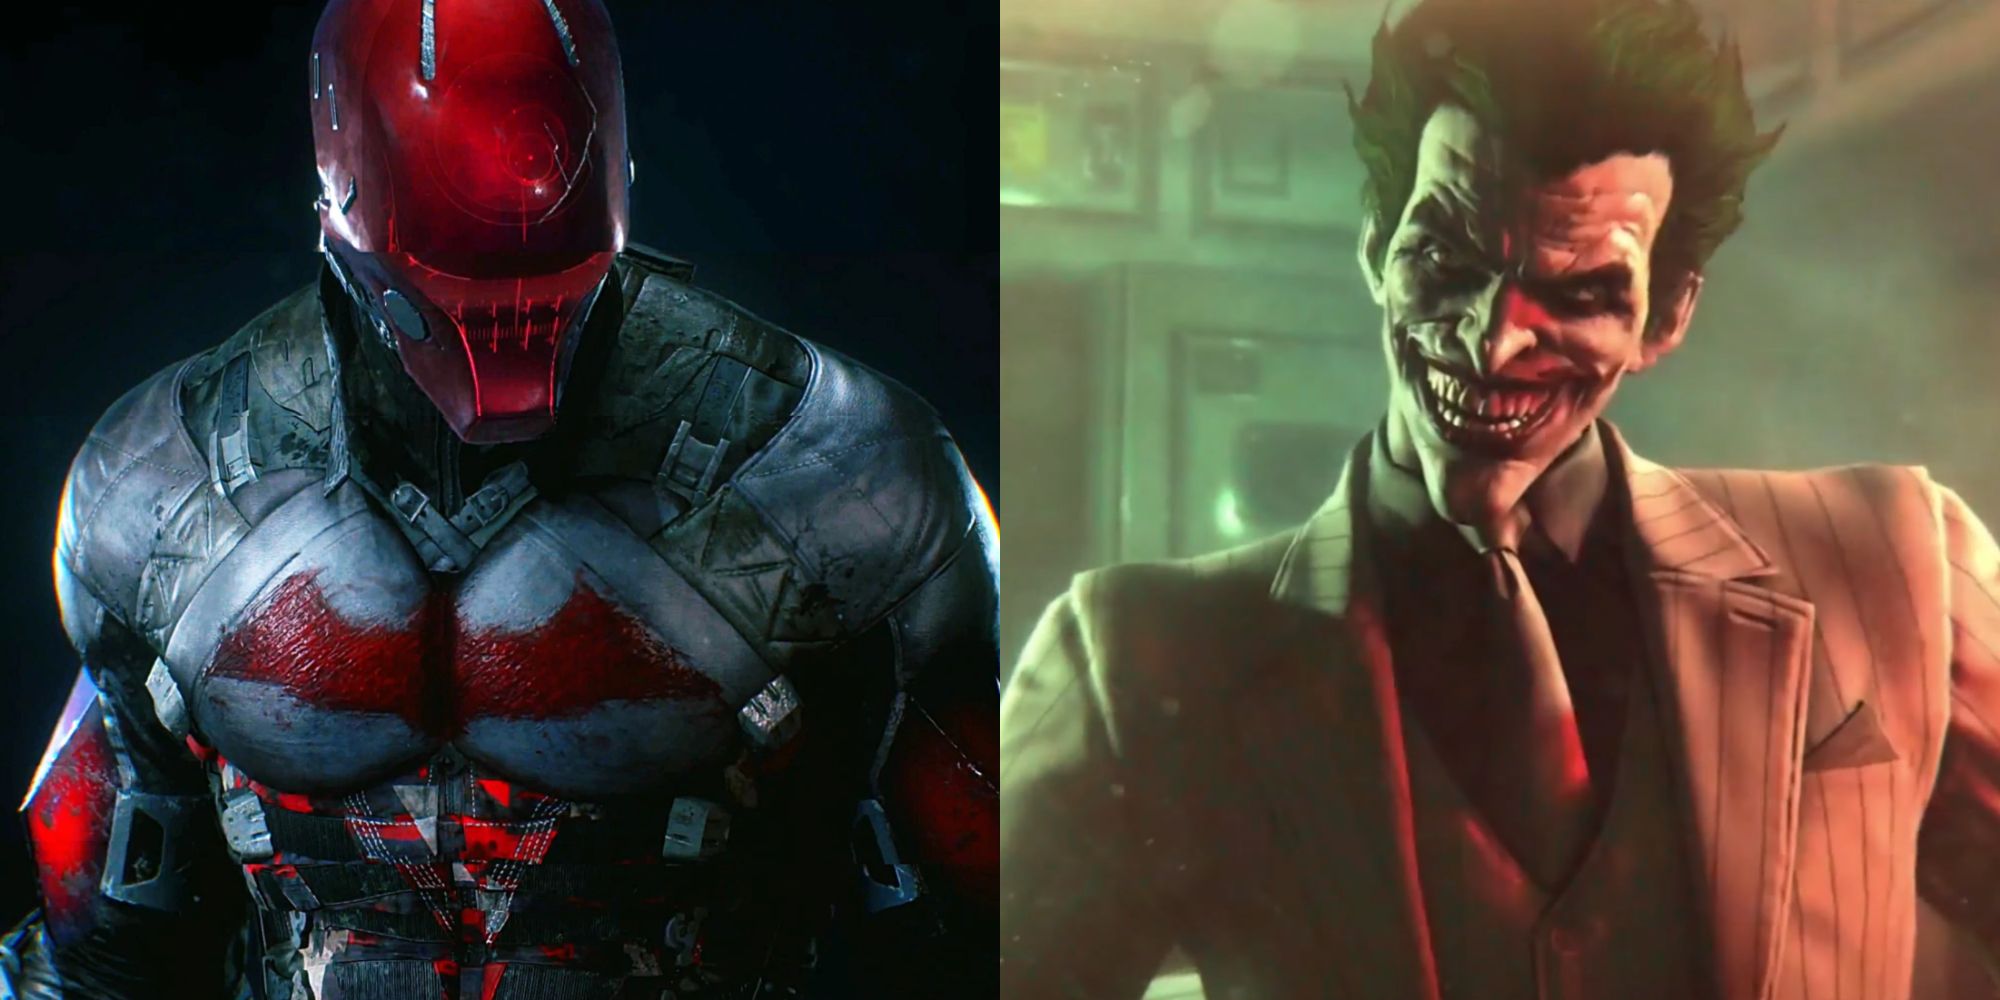 Split image of Red Hood and young Joker from the Batman Arkham games